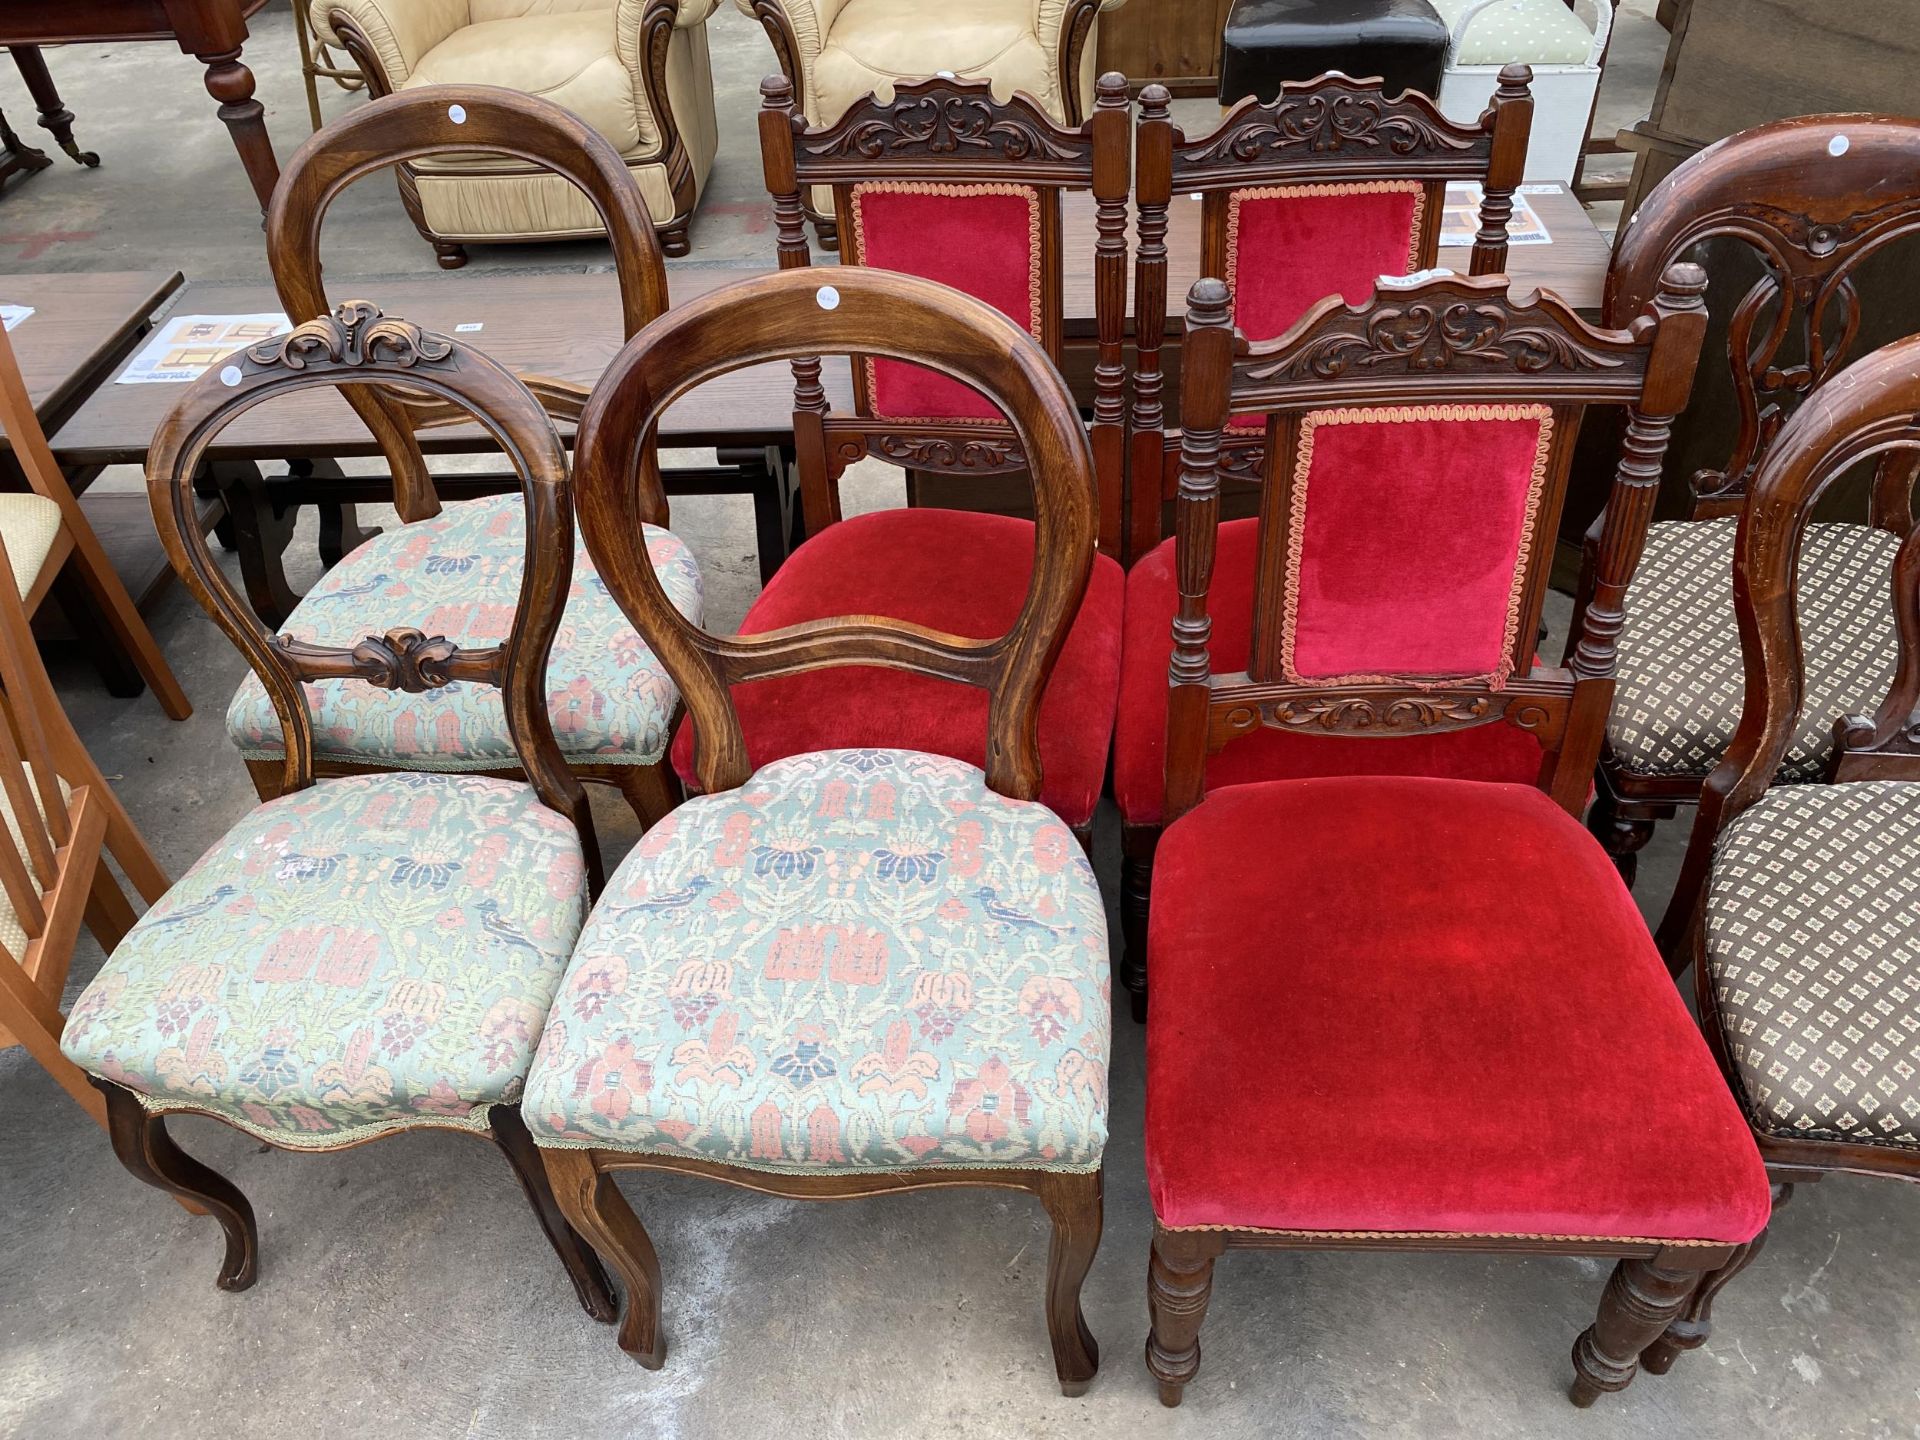 THREE VICTORIAN MAHOGANY DINING CHAIRS WITH CARVED BACK RAILS AND THREE BALLOON BACK CHAIRS